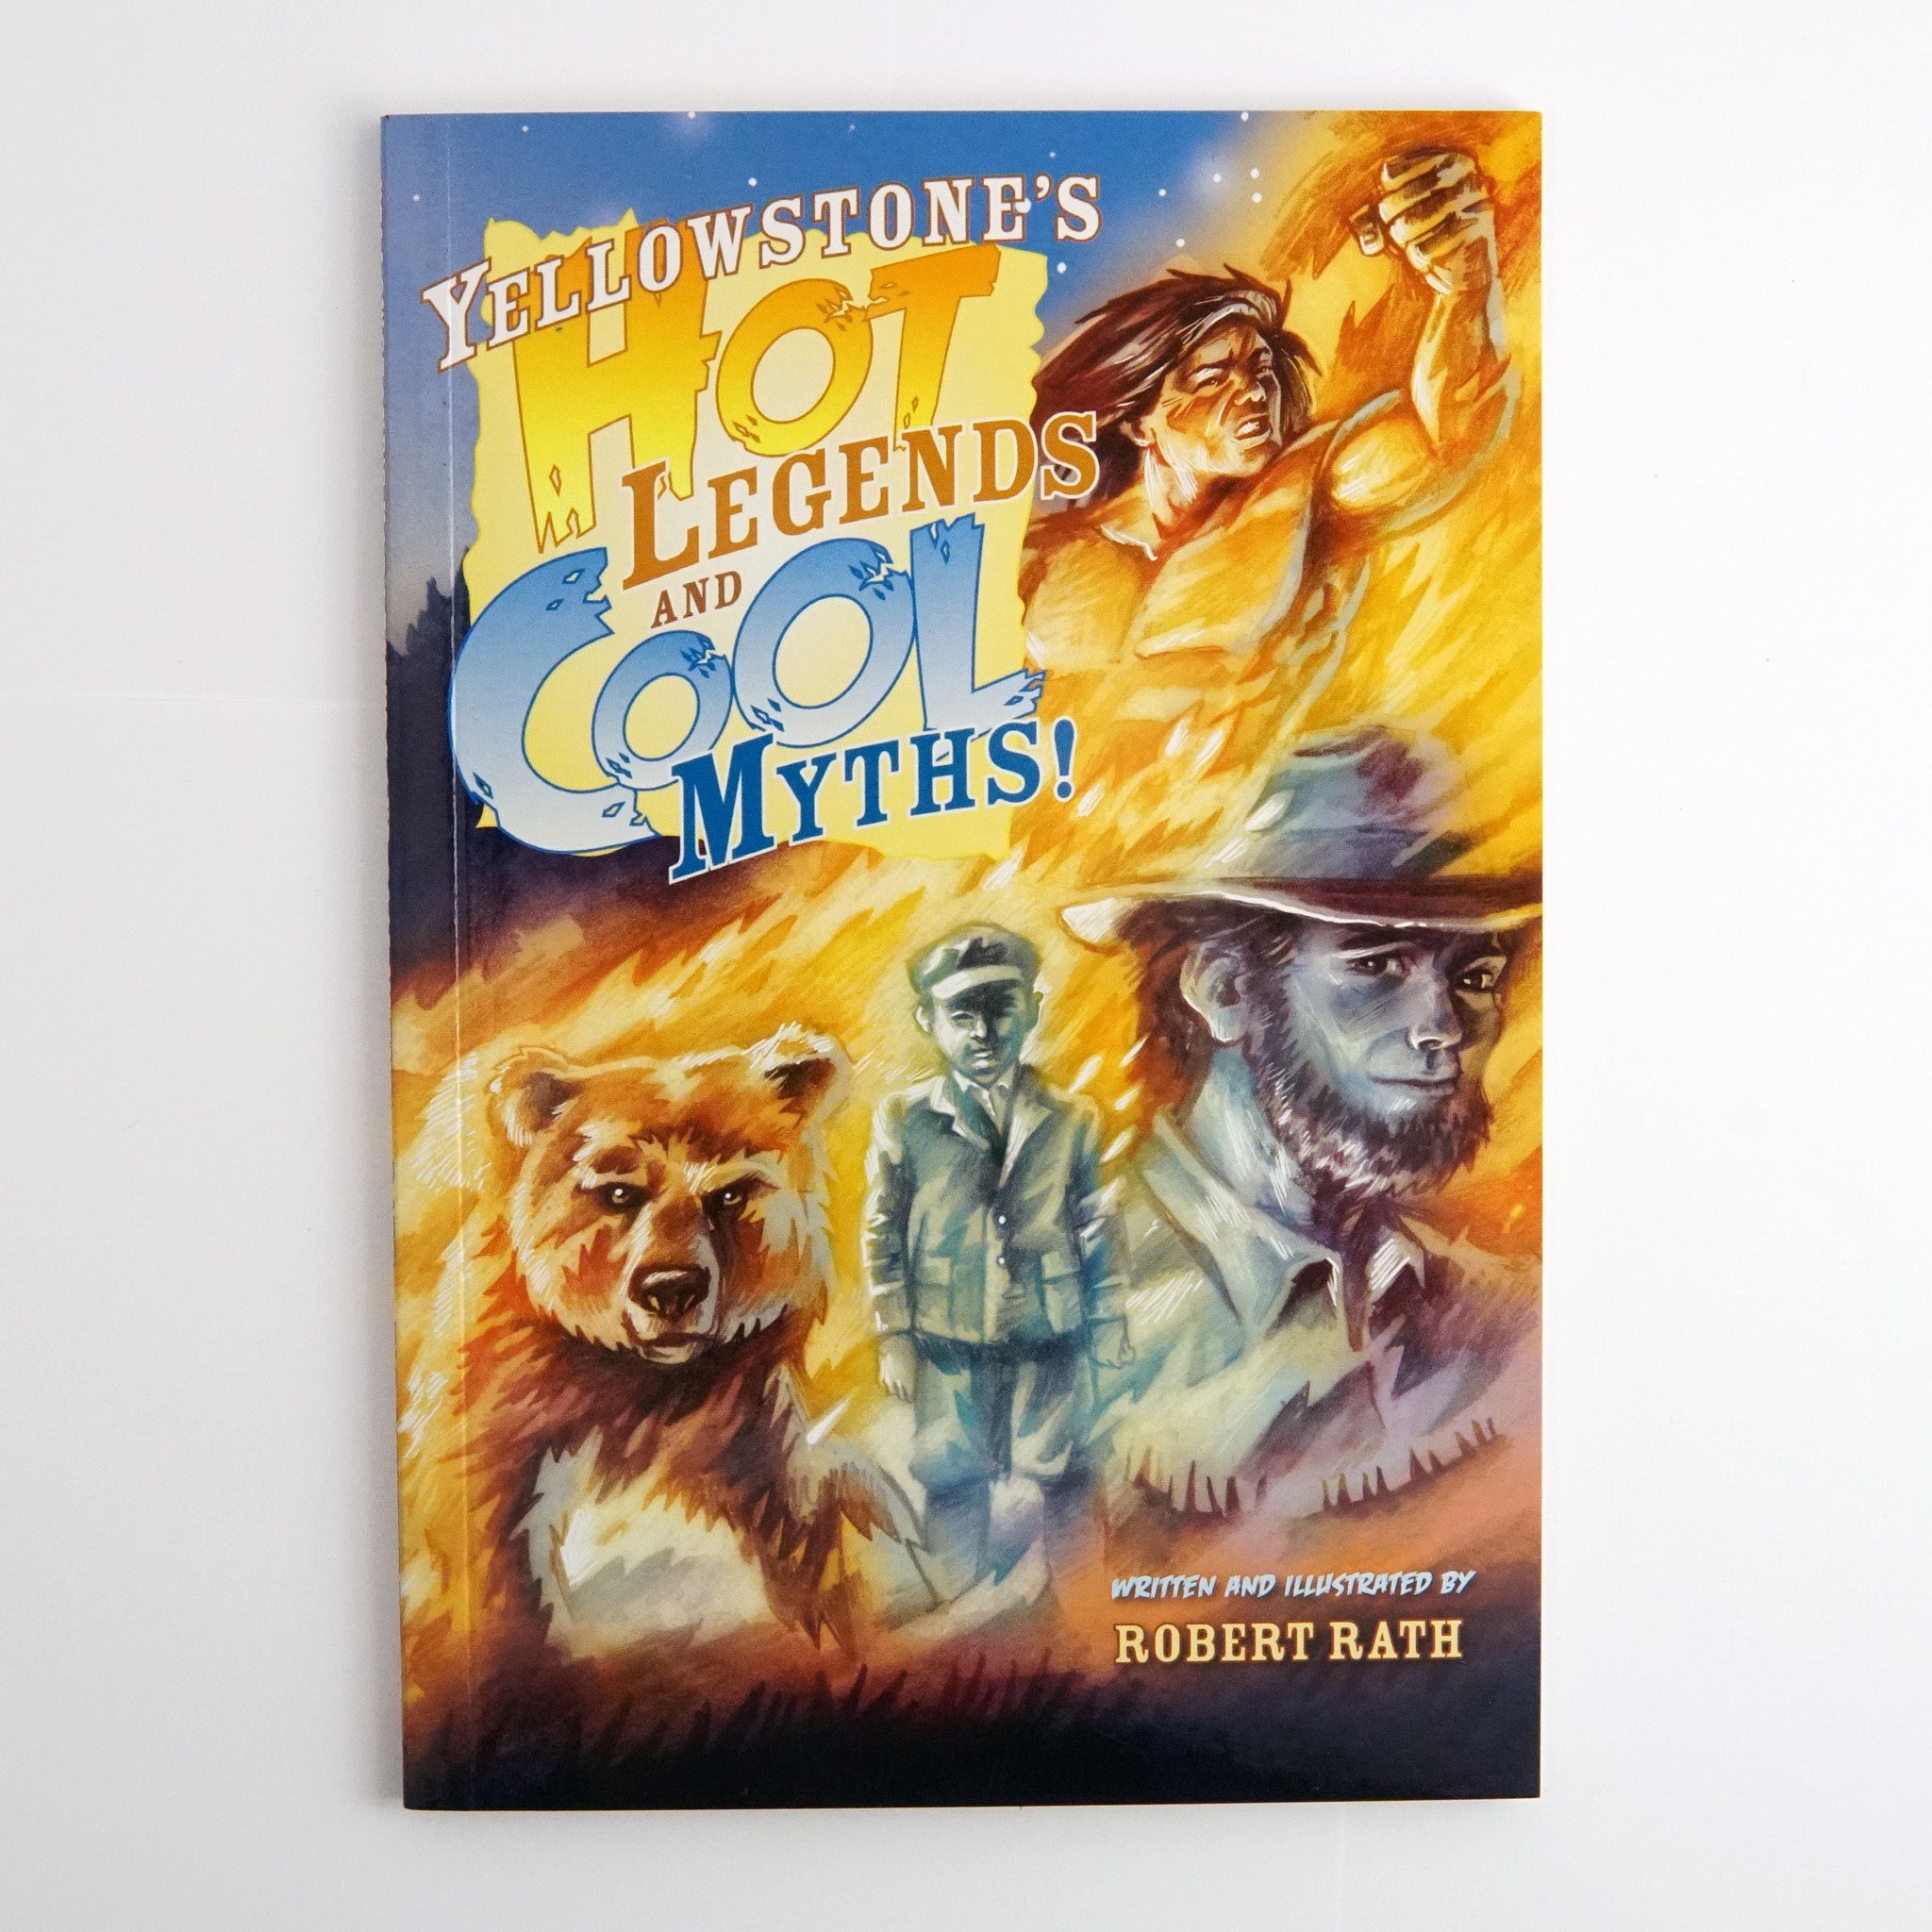 BK 19 YELLOWSTONE'S HOT LEGENDS AND COOL MYTHS  BY ROBERT RATH #21029959 D2 MAY23